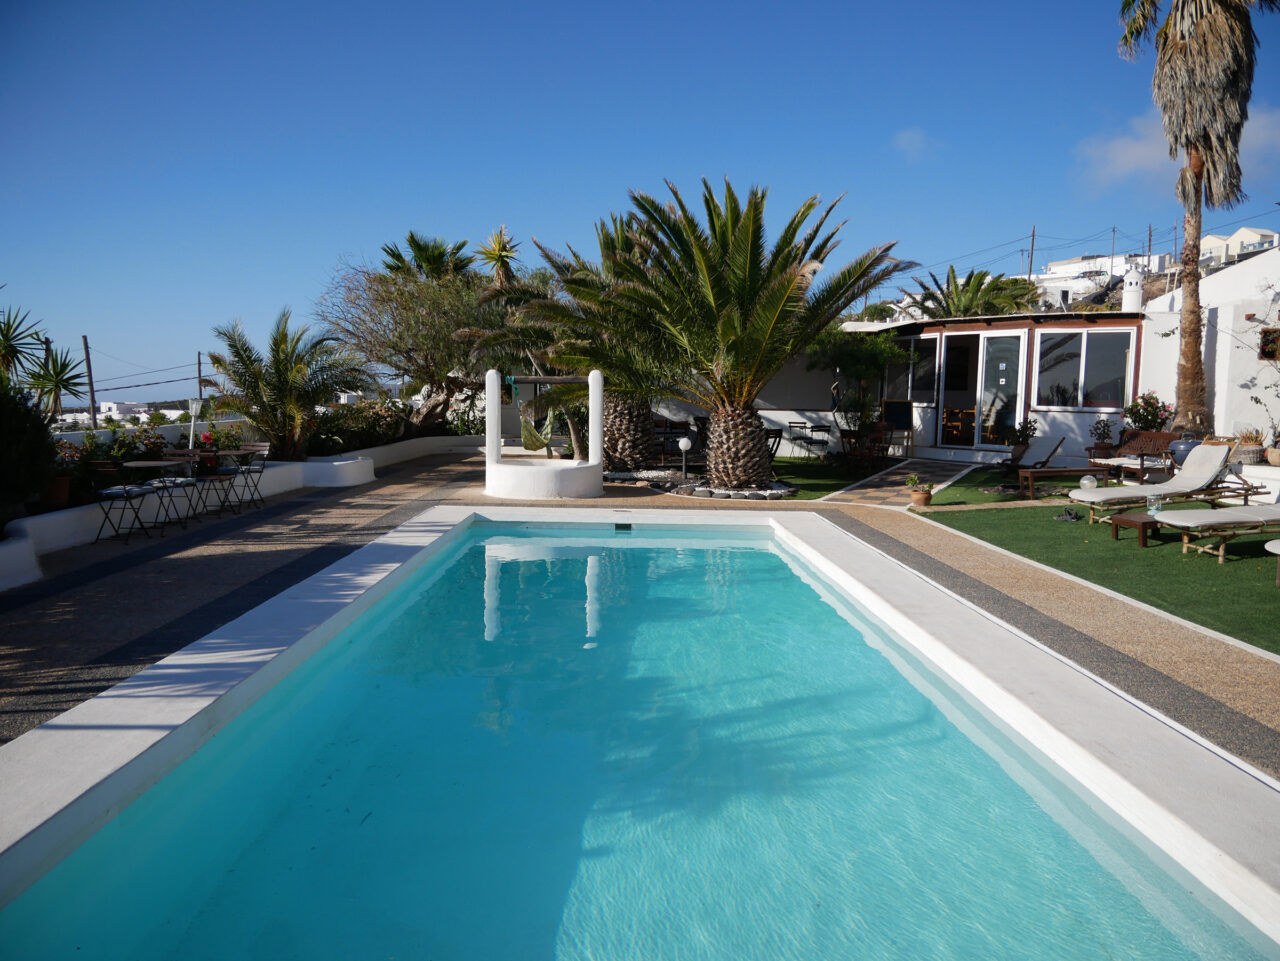 Pool at Oasis Surf House Lanzarote